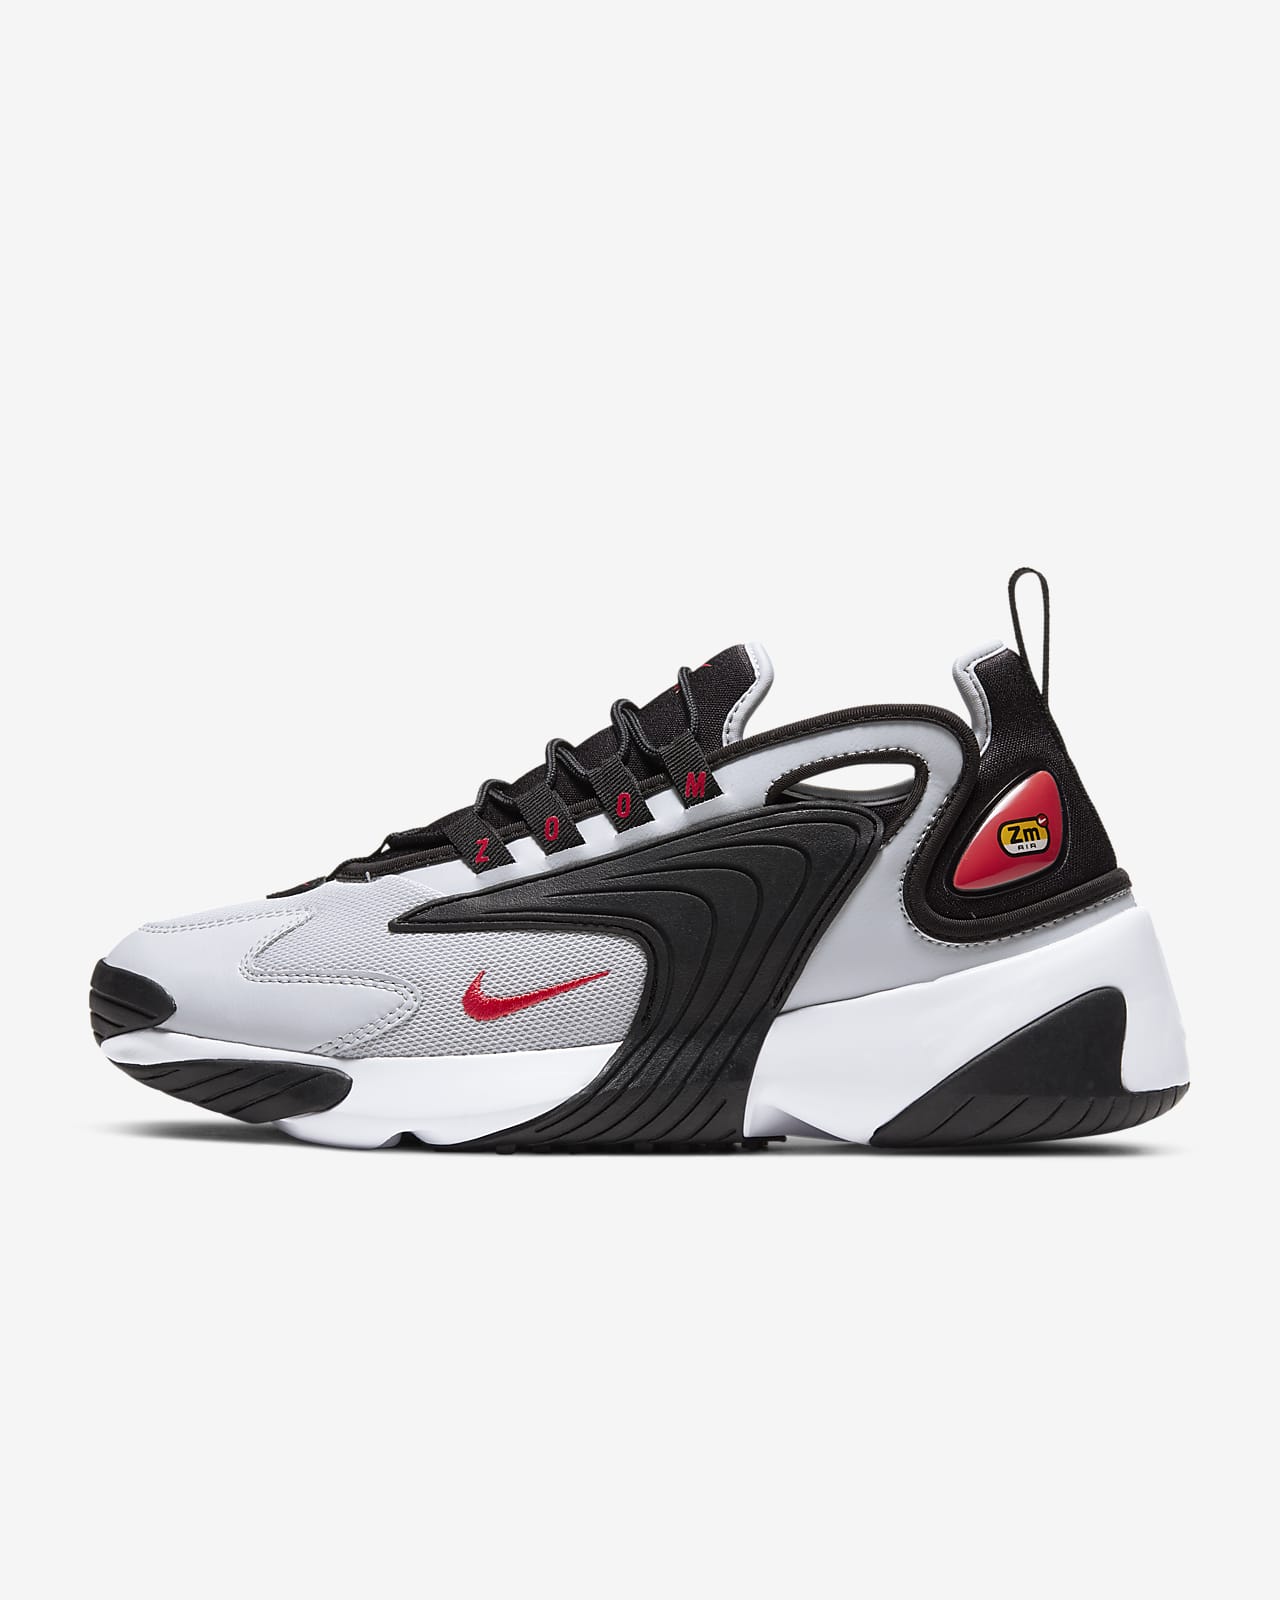 Nike Zoom 2k All Black Best Sale, UP TO 54% OFF